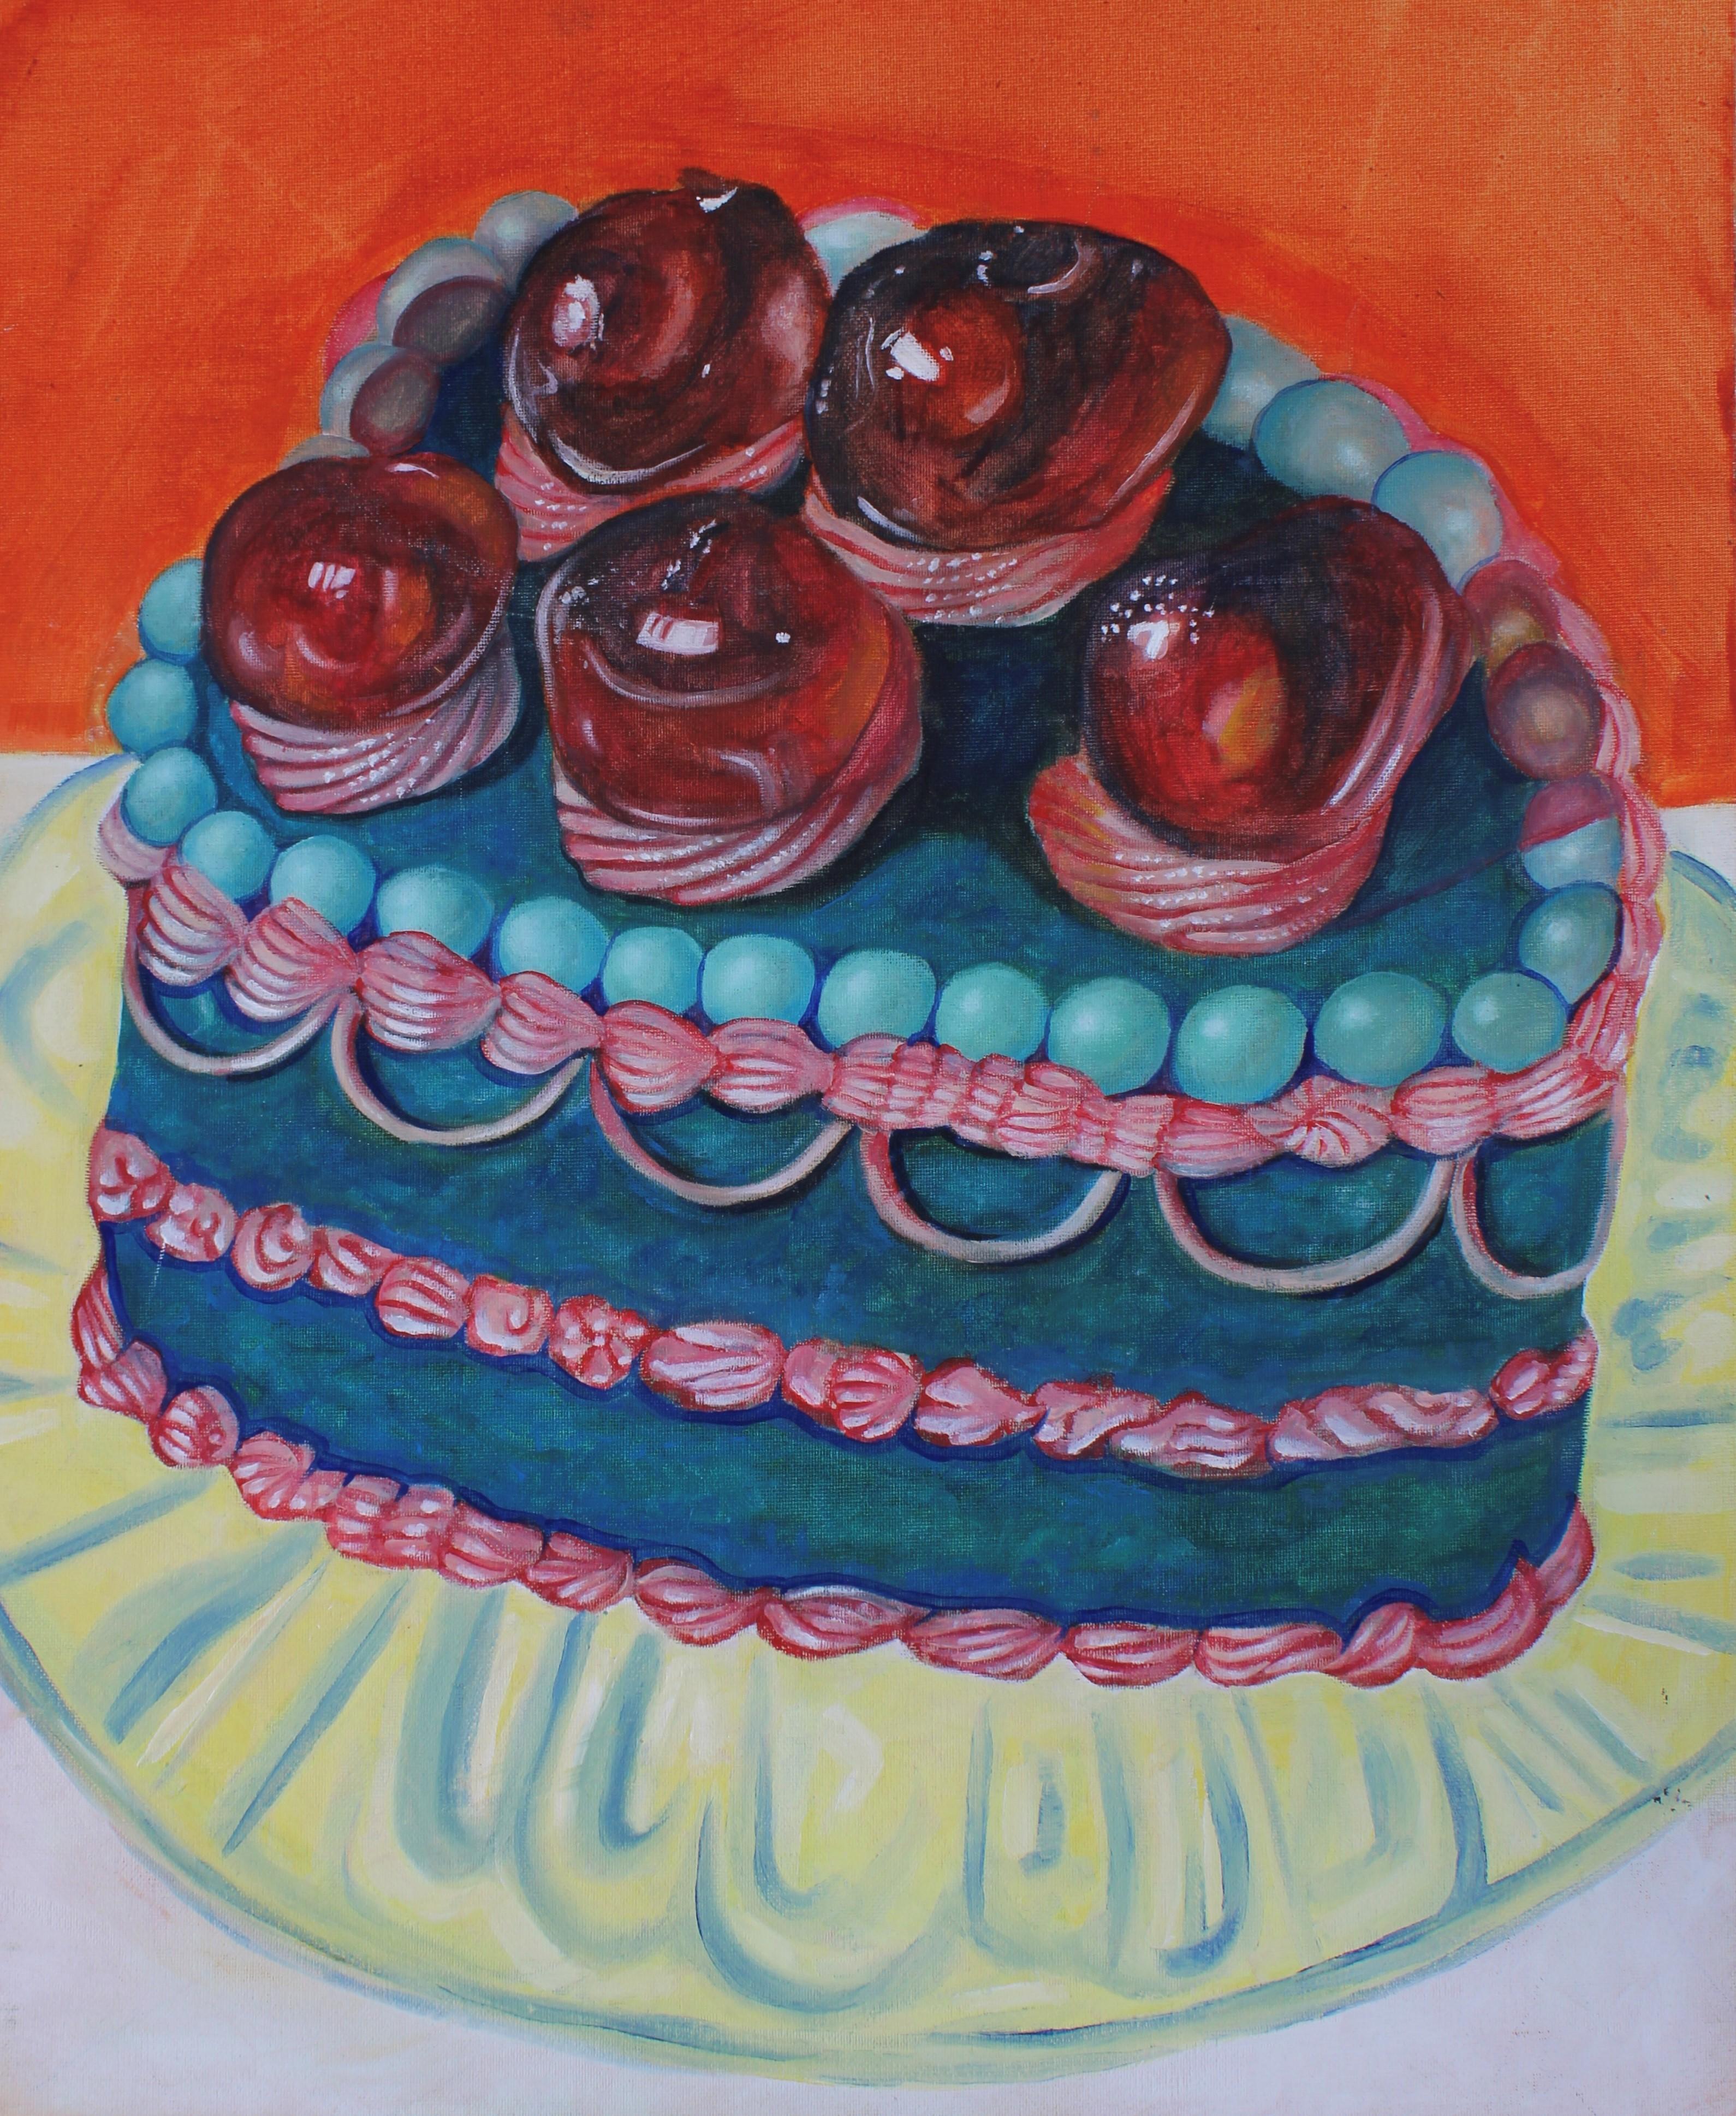 An acrylic painting of an elaborately decorated cake with piping, in pink, blue and red. 